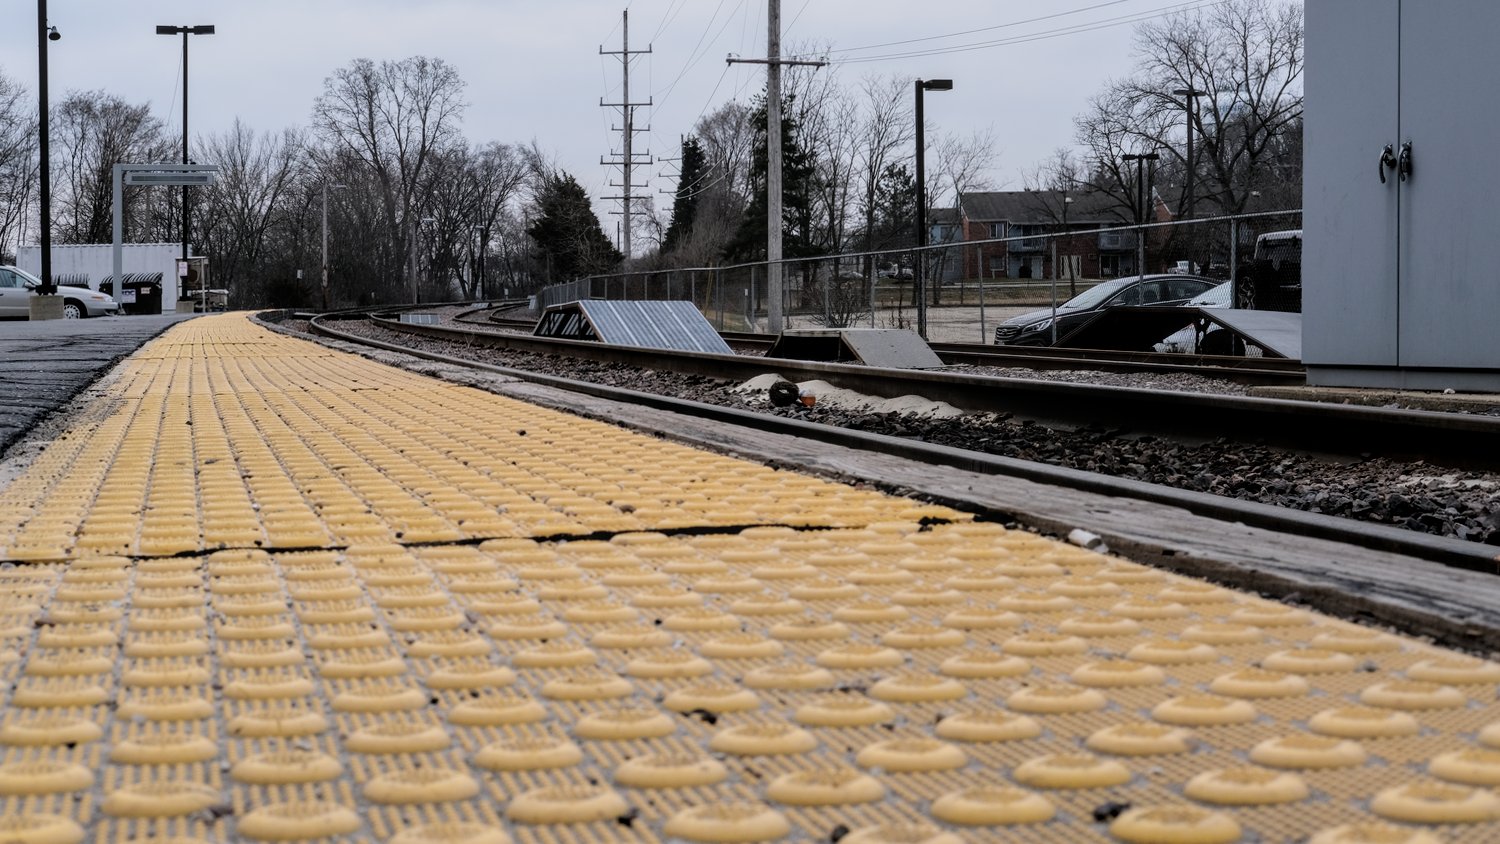 Platform and train tracks at the McHenry Metra station.